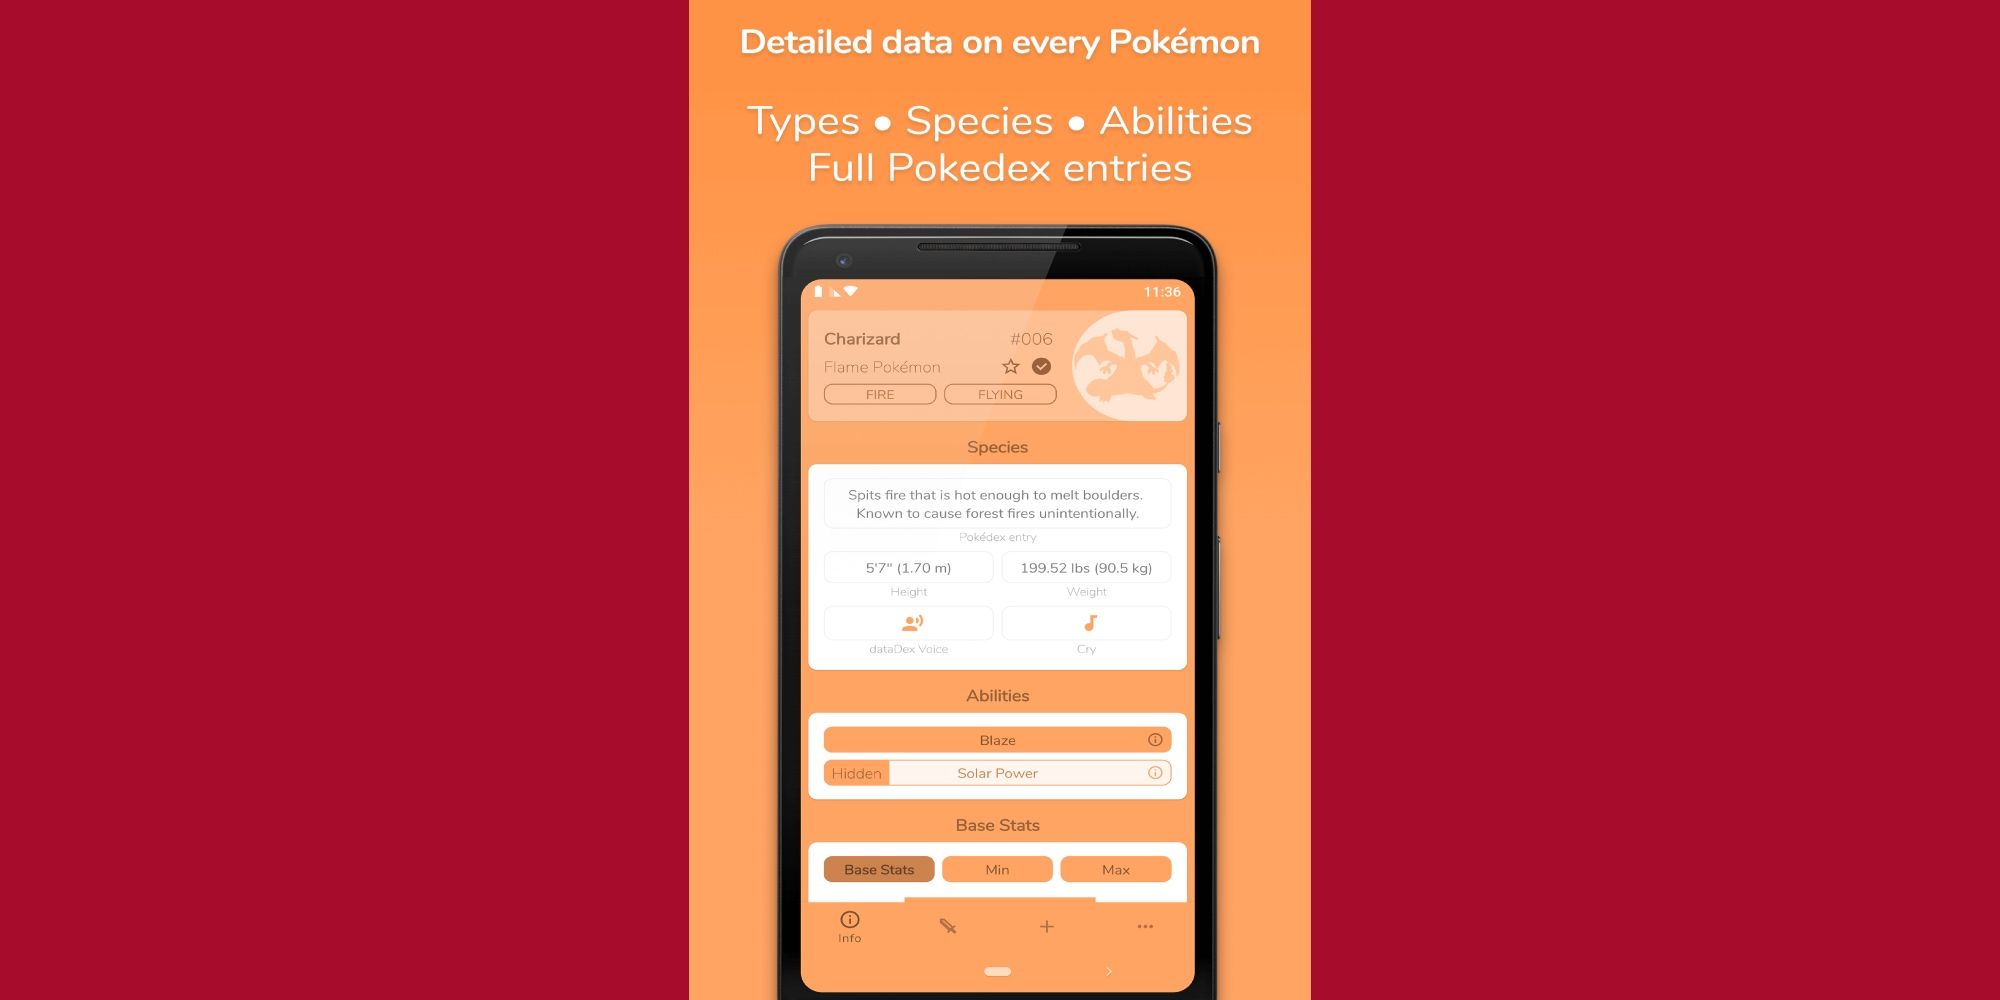 Player researches info on Pokemon using a dataDex